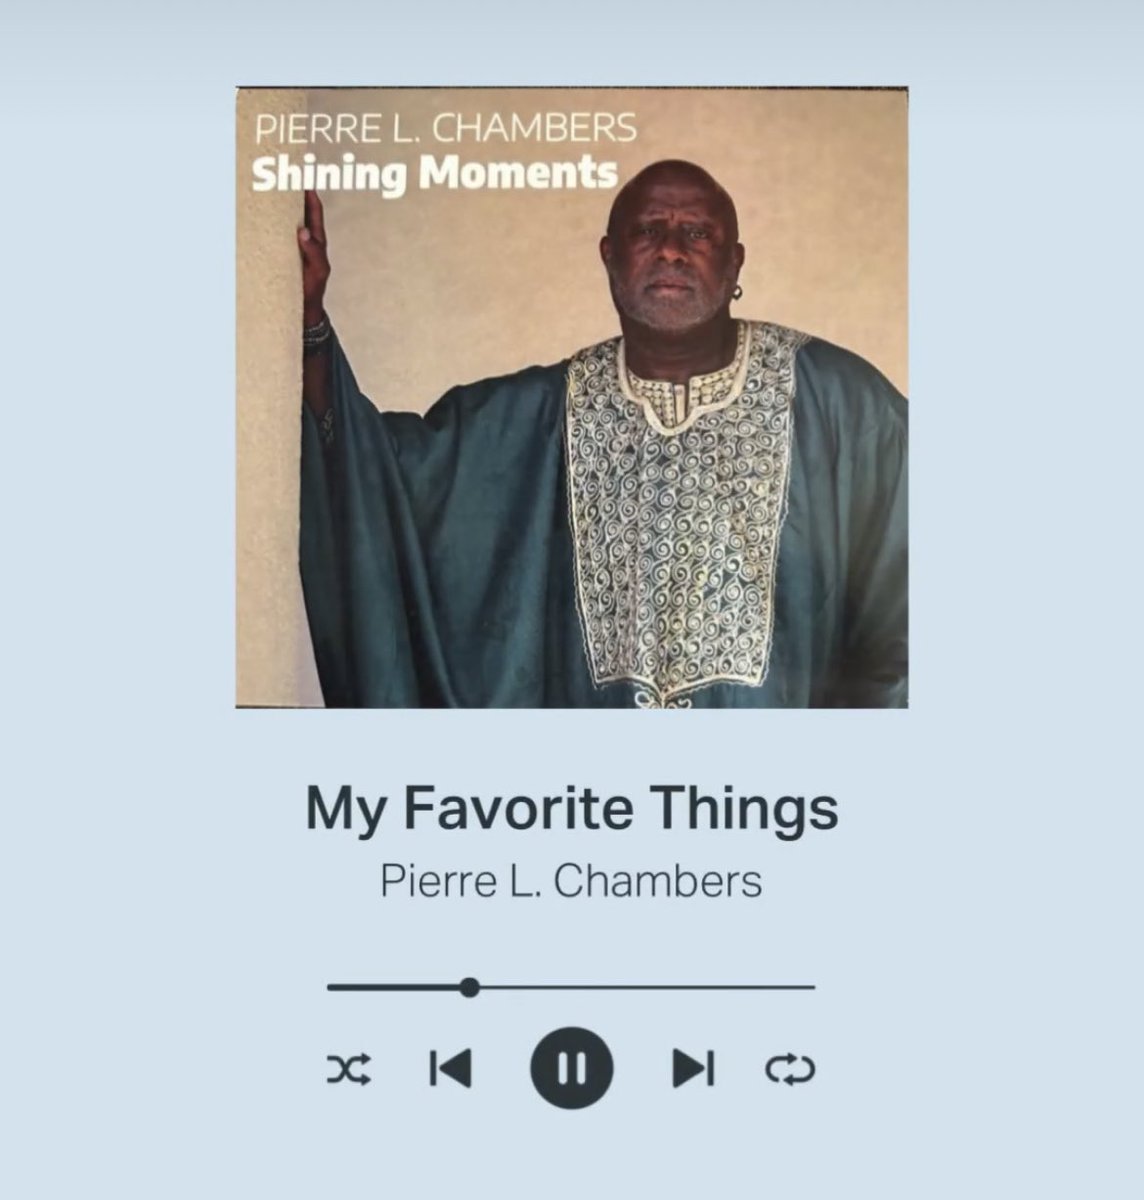 #AlbumOfTheWeek - Shining Moments by Pierre L. Chambers. Thank you Michael, our music director and host of 88 Jazz Place Mornings and Classics & Grooves, for recommending this album! Don’t forget to subscribe to our newsletter in order to have access to our  #AlbumOfTheWeek.